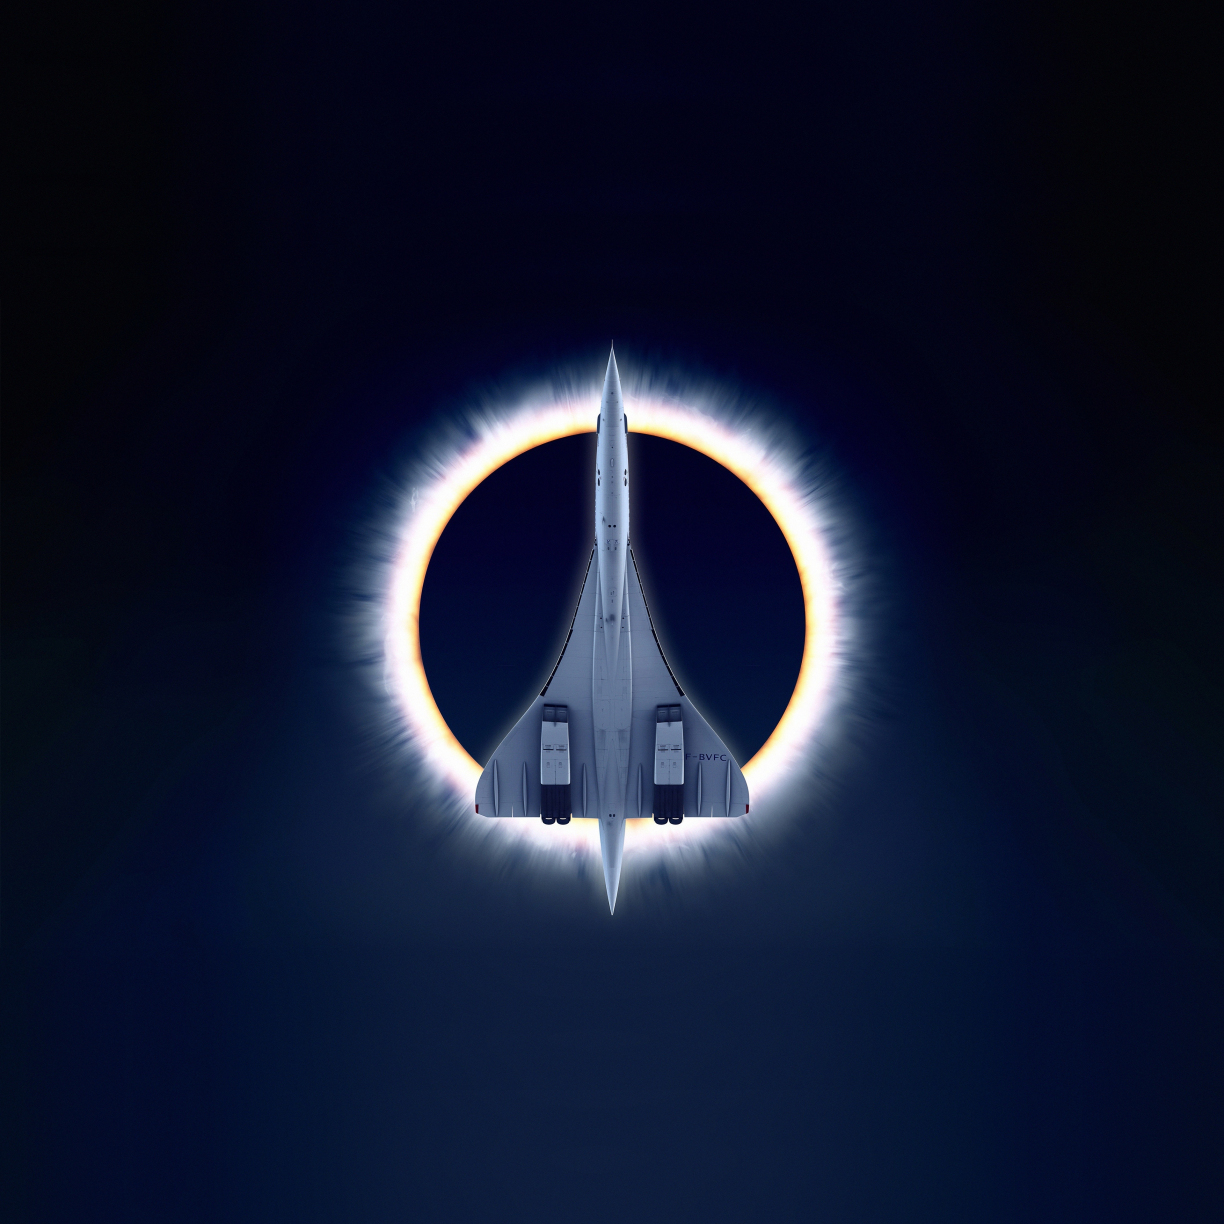 Concorde Carre, eclipse, airplane, moon, aircraft, 1224x1224 wallpaper